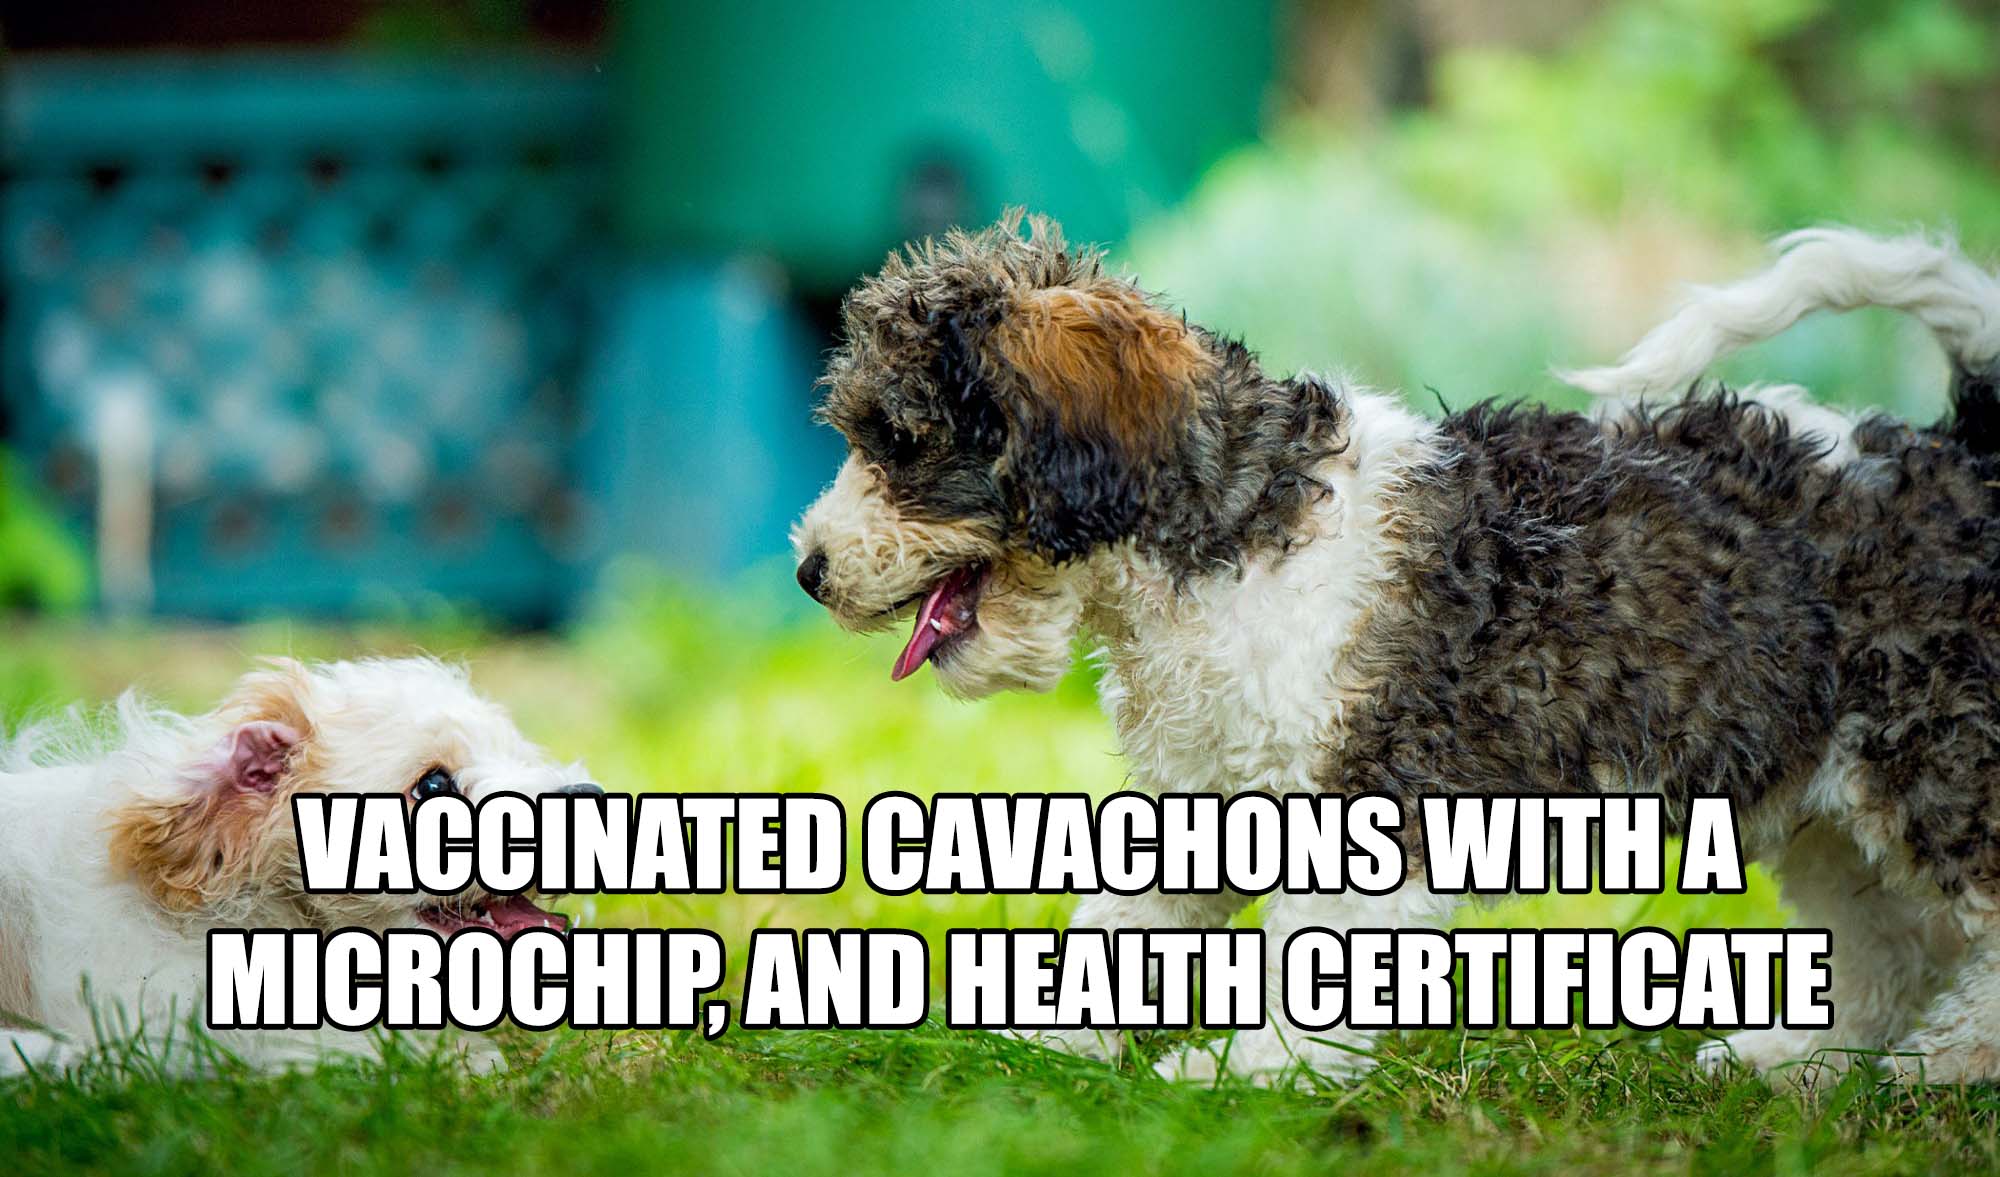 VACCINATED CAVACHONS WITH A MICROCHIP AND HEALTH CERTIFCATES